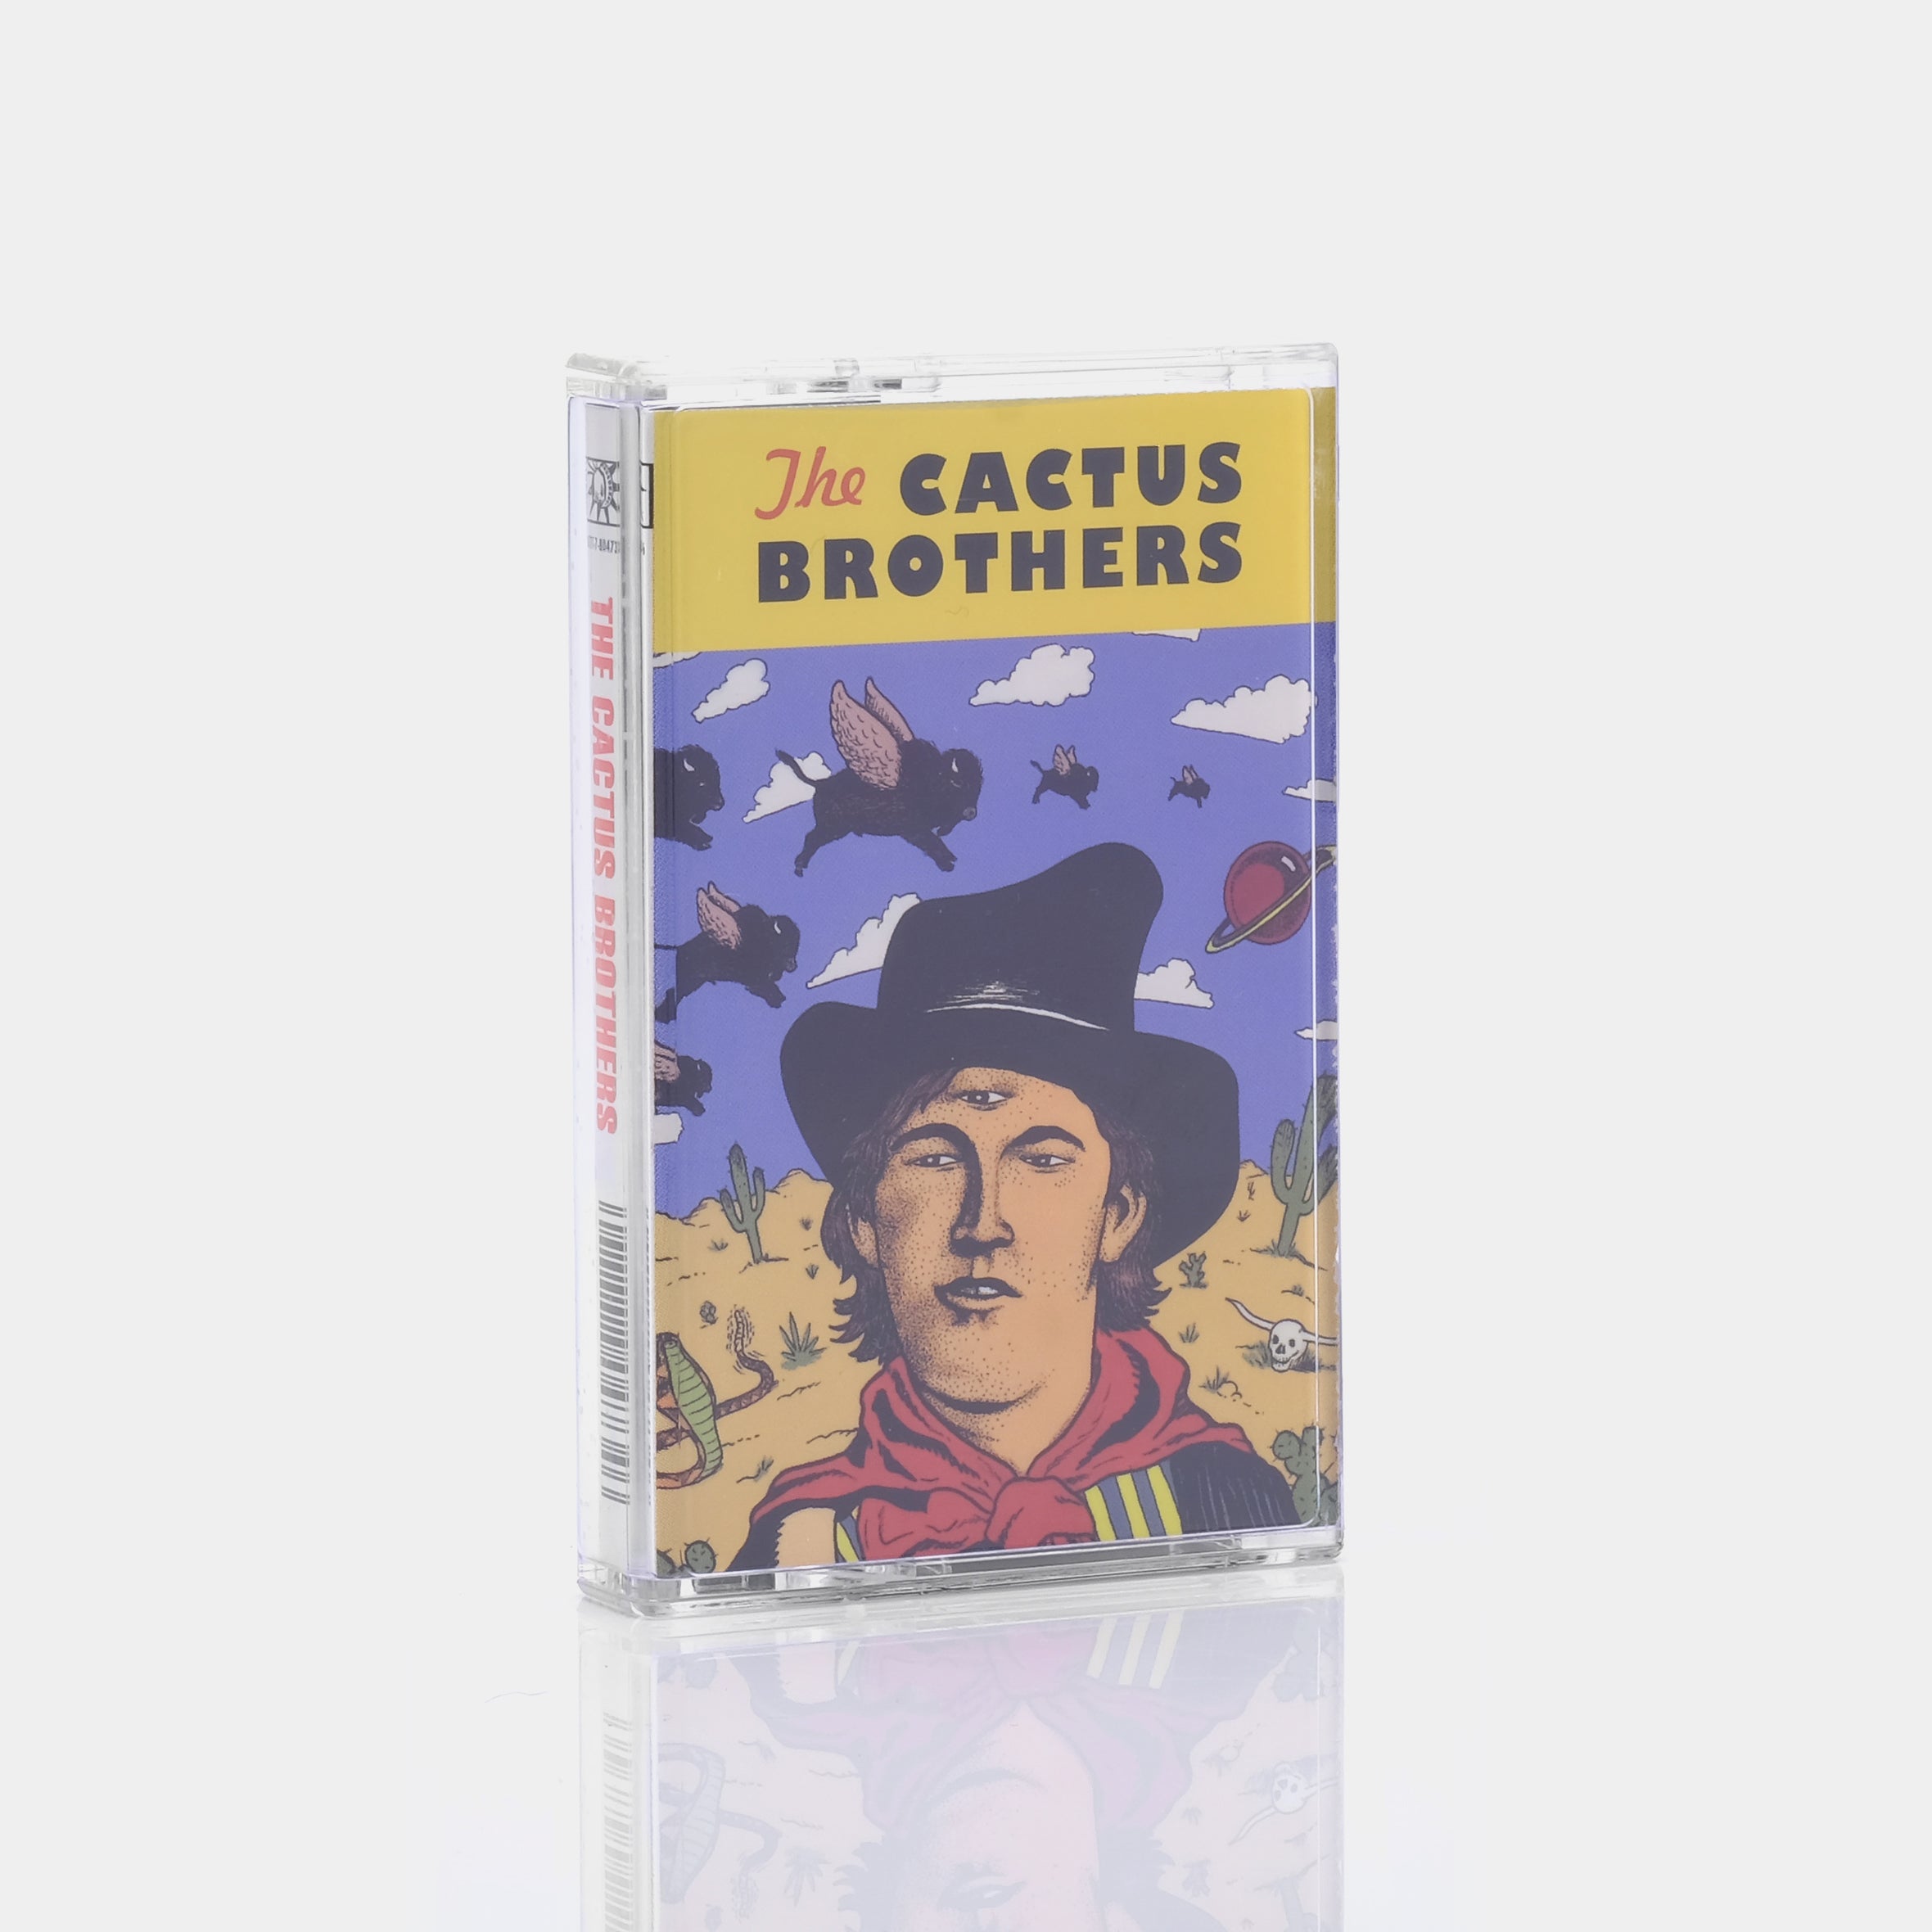 The Cactus Brothers - The Cactus Brothers Cassette Tape